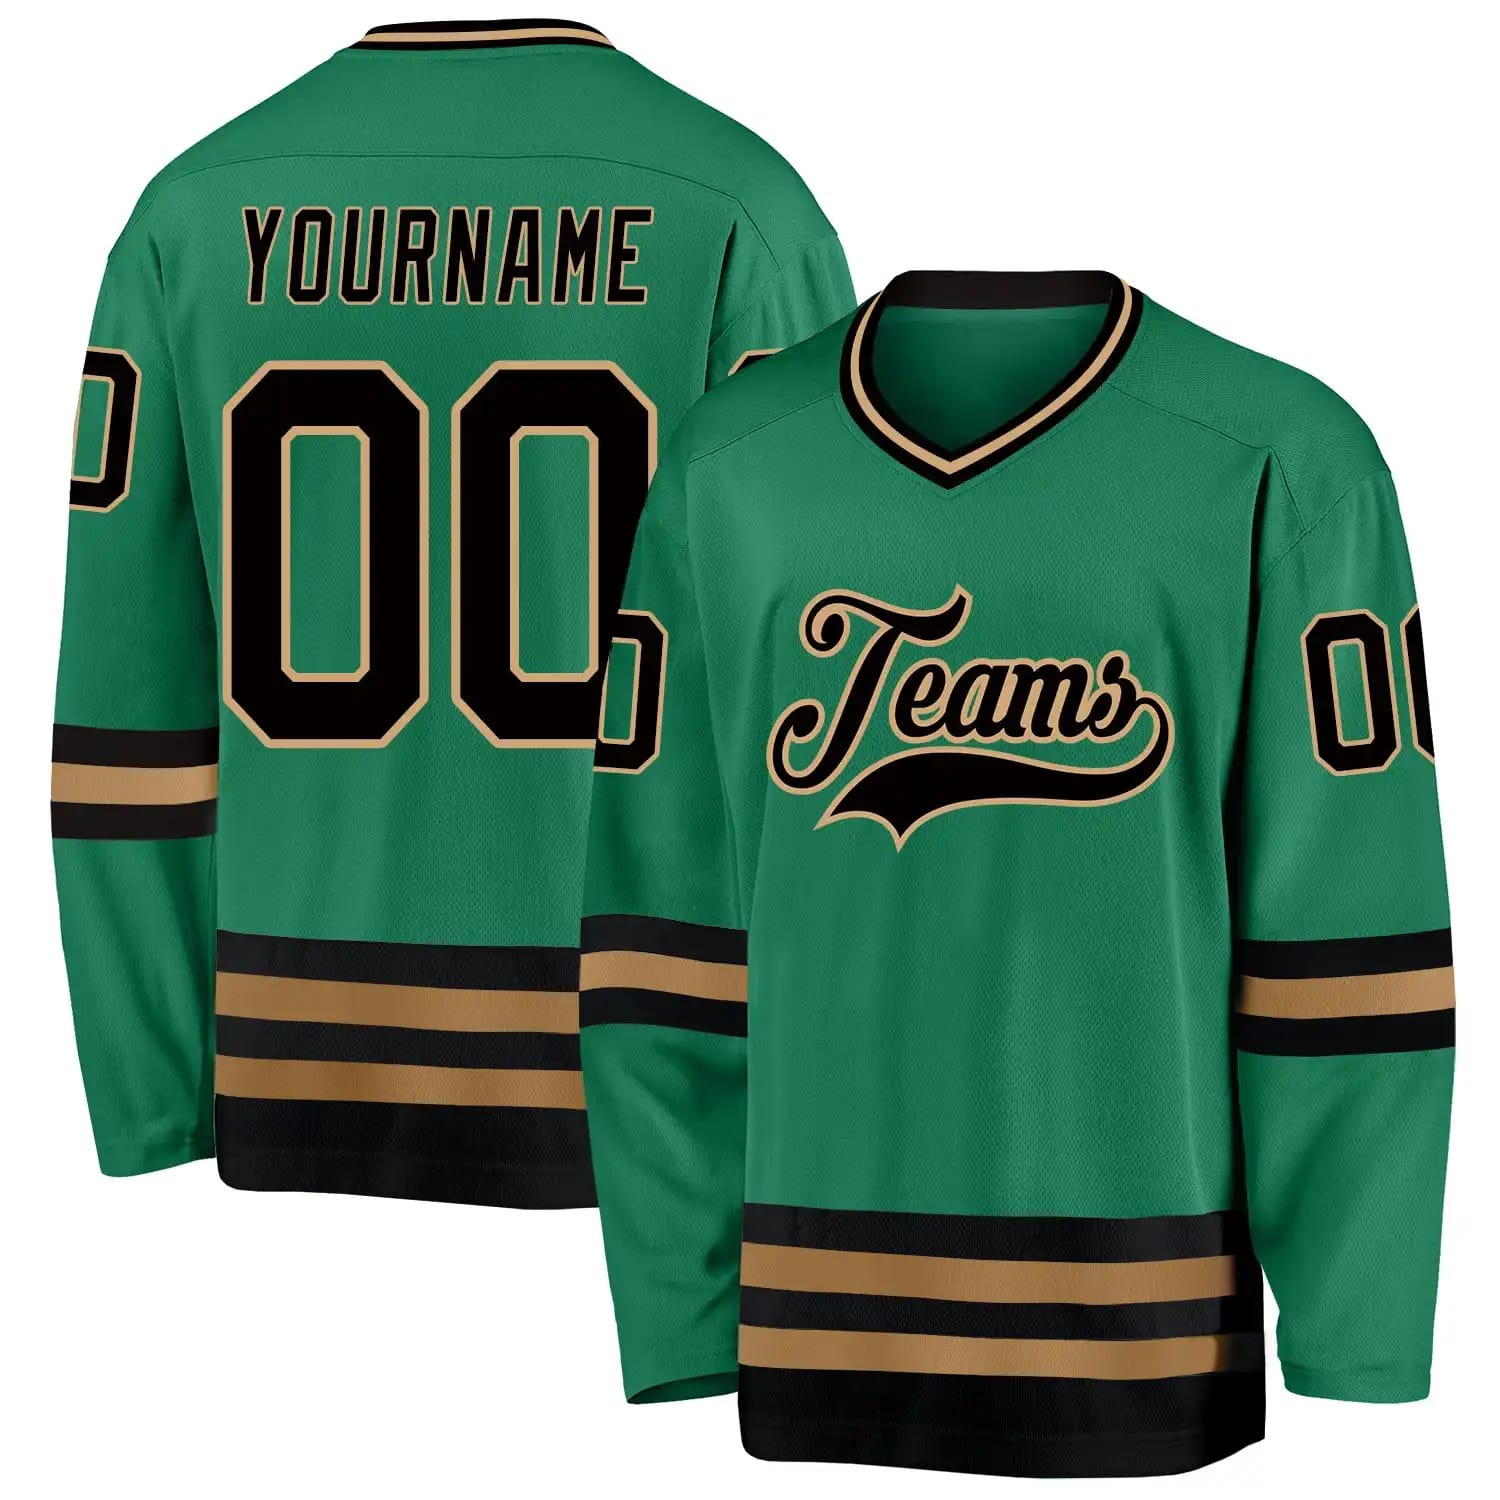 Stitched And Print Kelly Green Black-Old Gold Hockey Jersey Custom